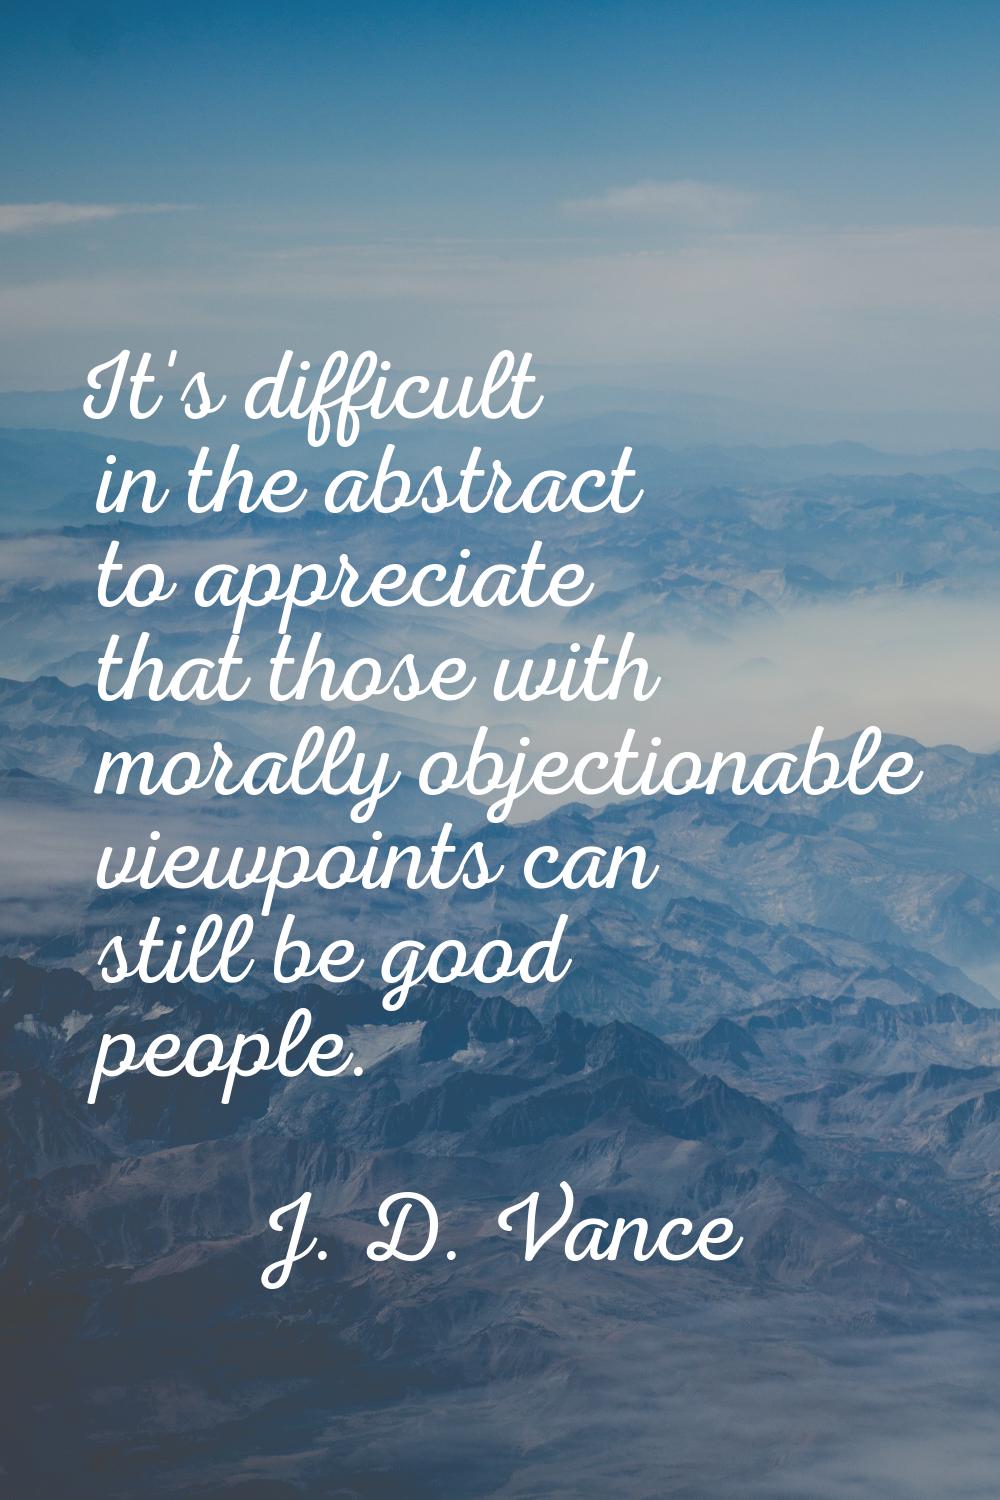 It's difficult in the abstract to appreciate that those with morally objectionable viewpoints can s